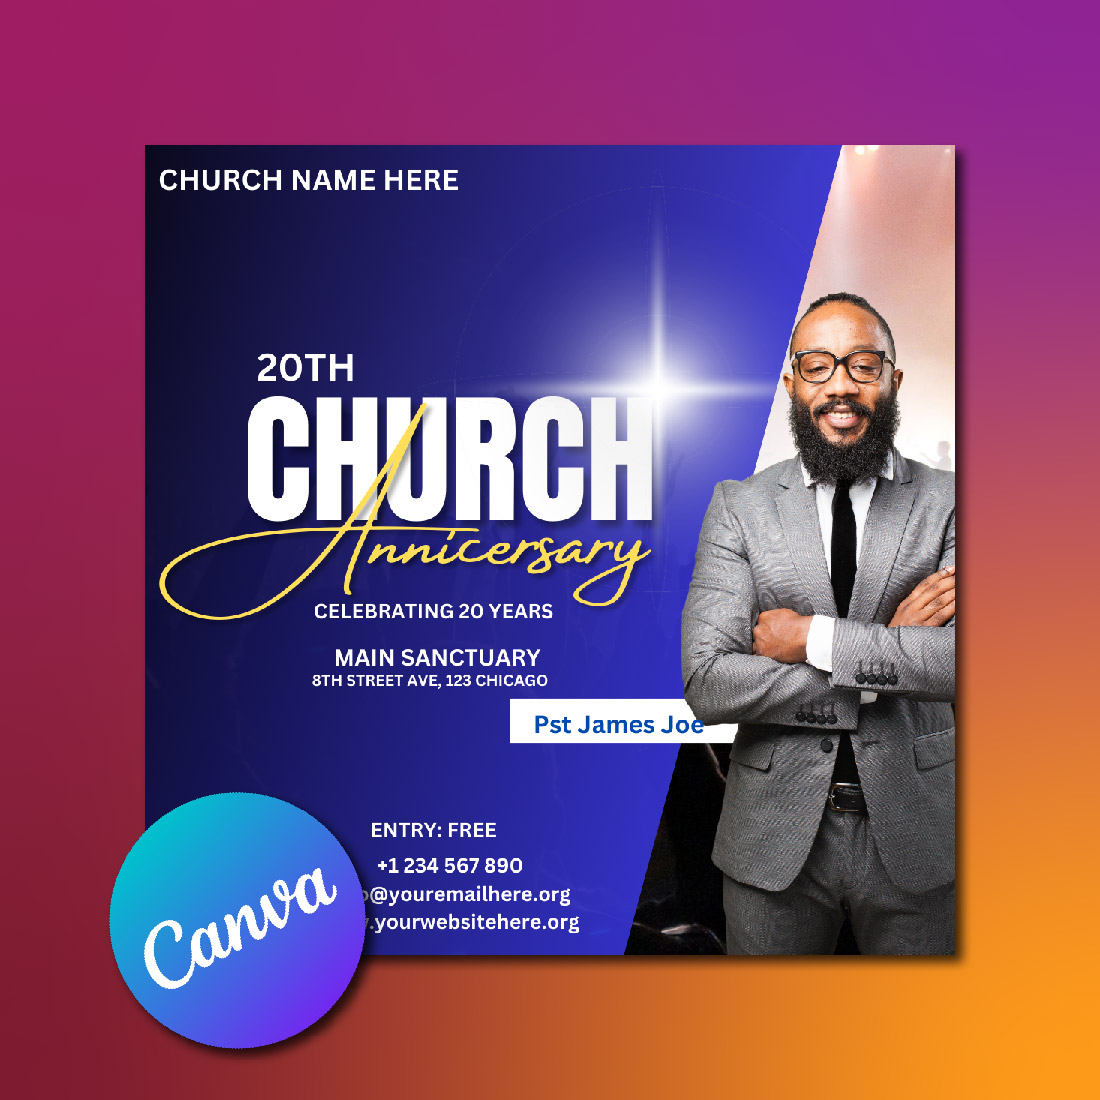 CHURCH ANNIVERSARY FLYER TEMPLATE cover image.